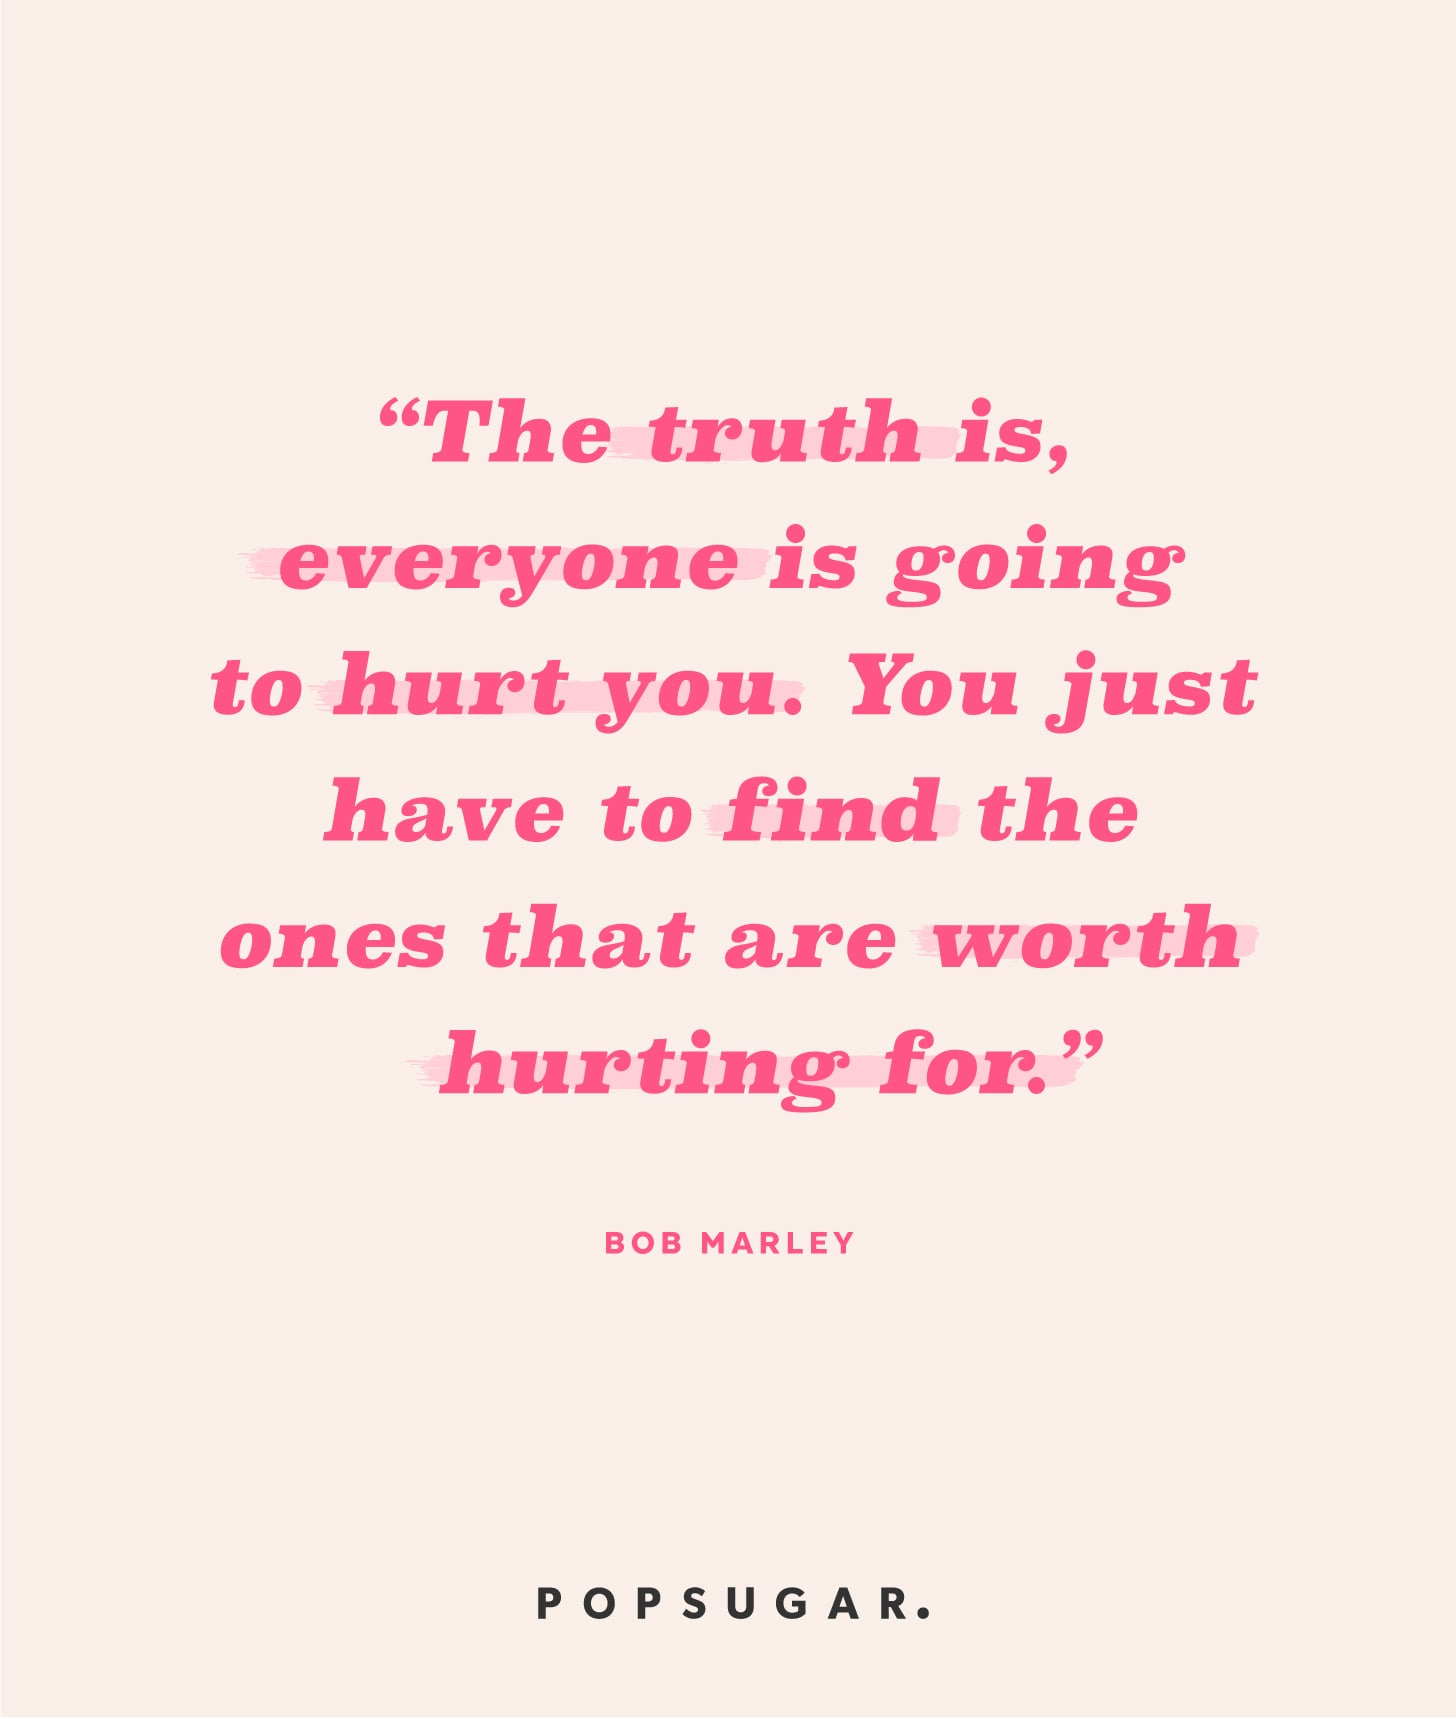 quotes about being hurt by someone you love